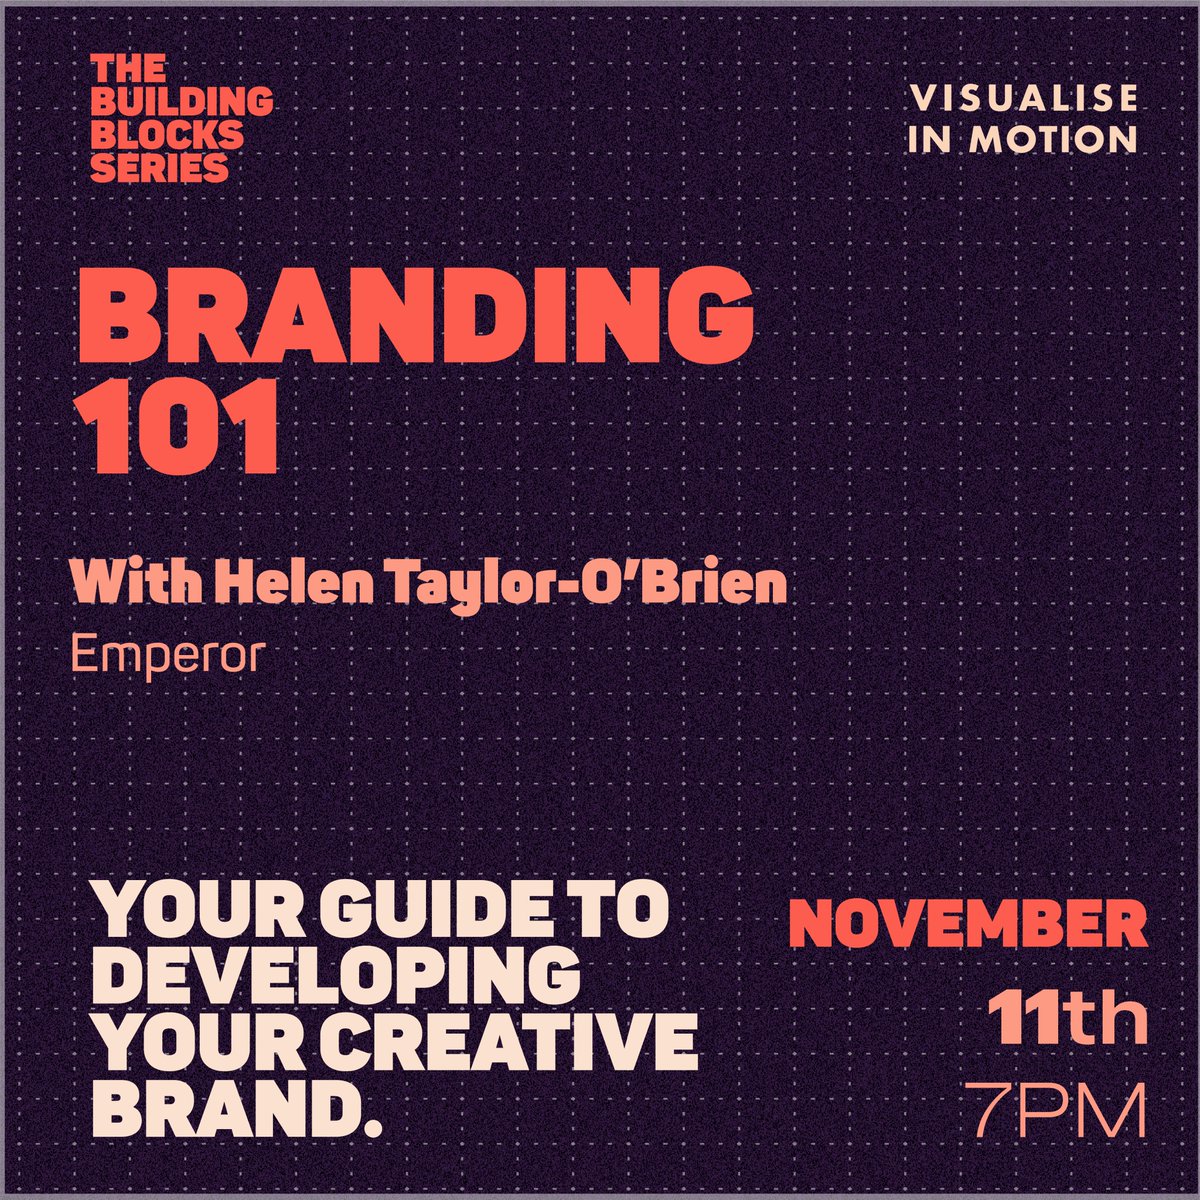 And the last in the series is Branding 101 on November 11th. What the heck is branding anyway and how do you develop a brand without the backing of large branding agencies? This session will cover that! Register for tickets here:  https://www.eventbrite.co.uk/e/122283761021 